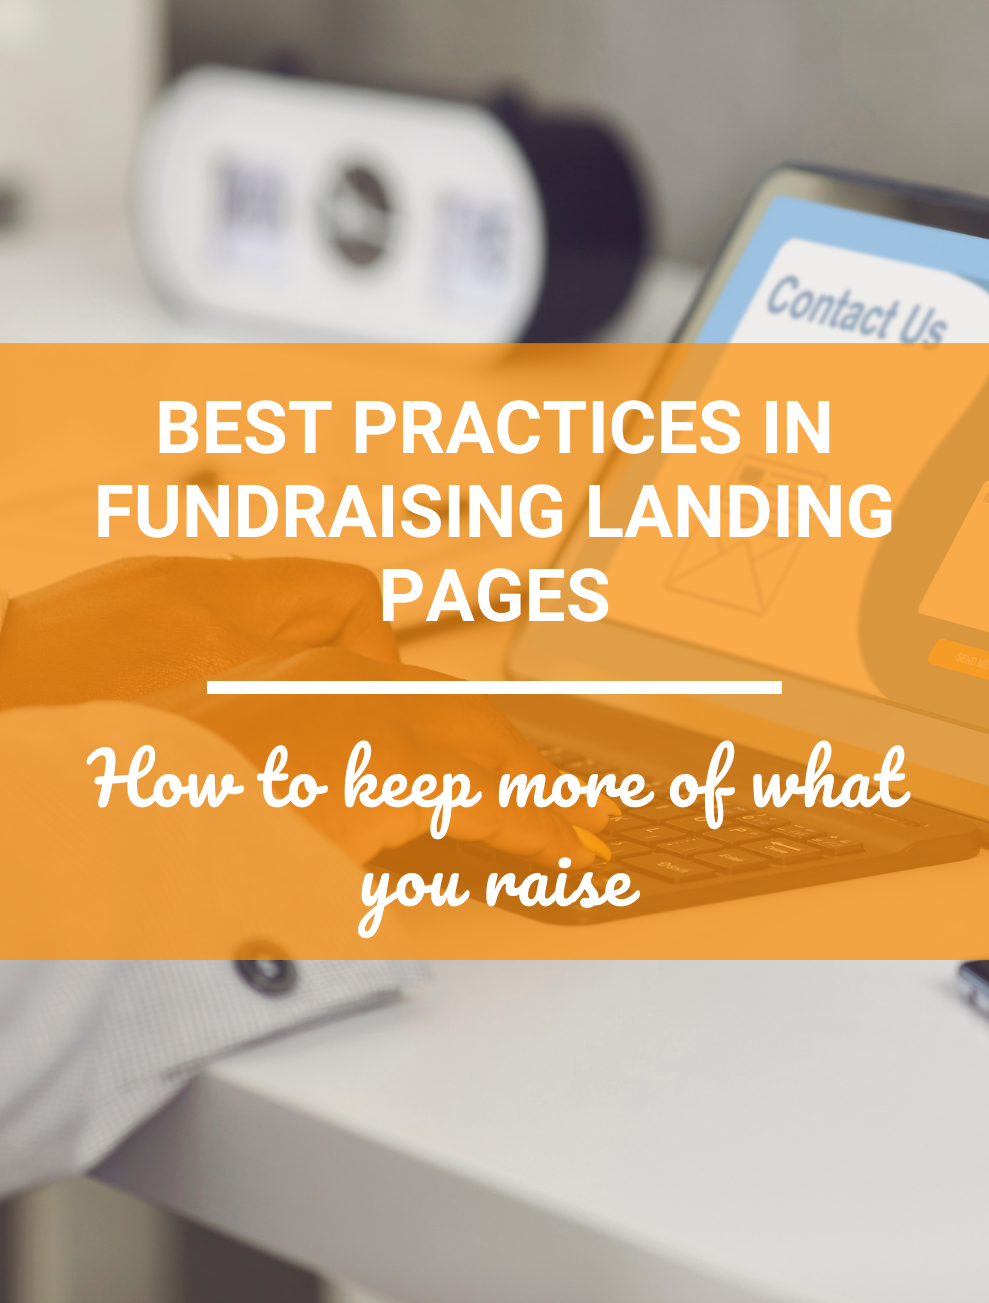 Best practices in fundraising landing pages